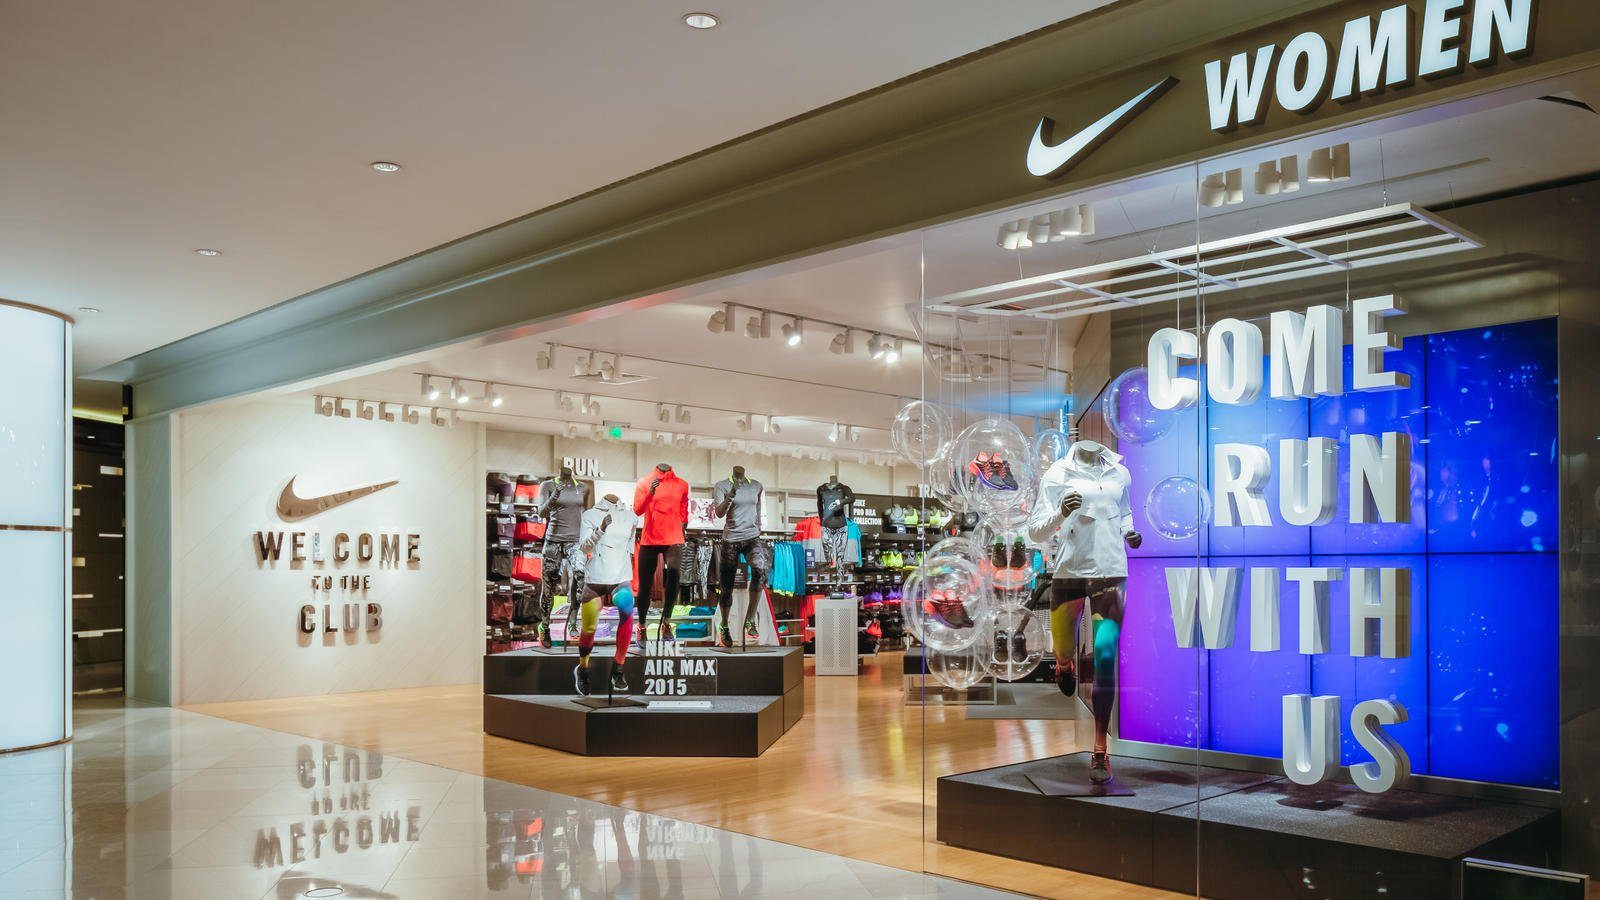 inside nike outlet store